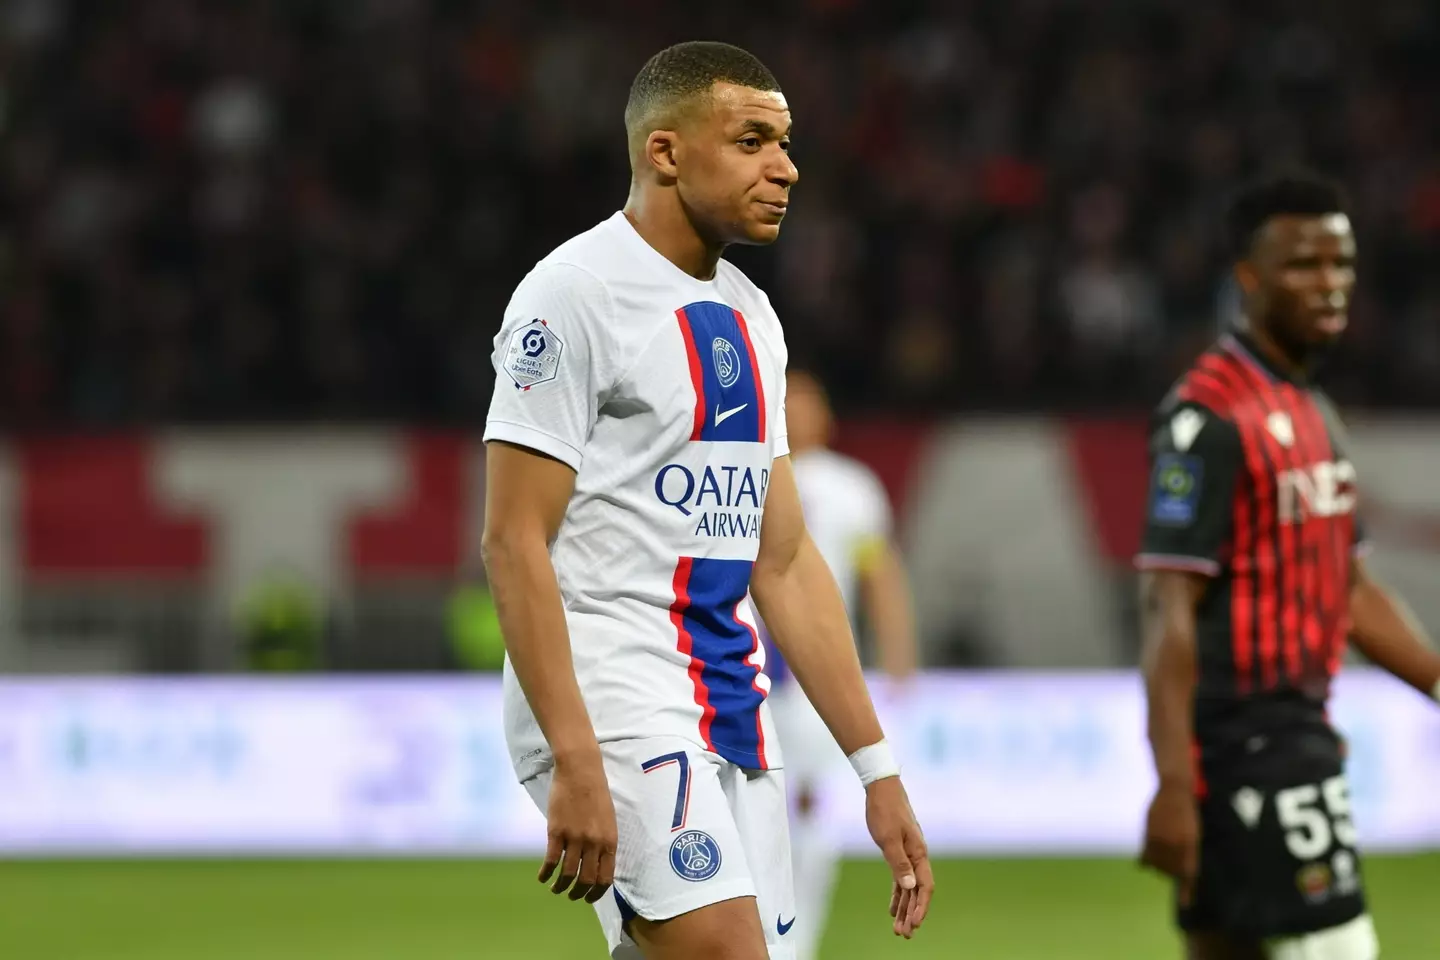 Kylian Mbappe in action for PSG. Image credit: Alamy